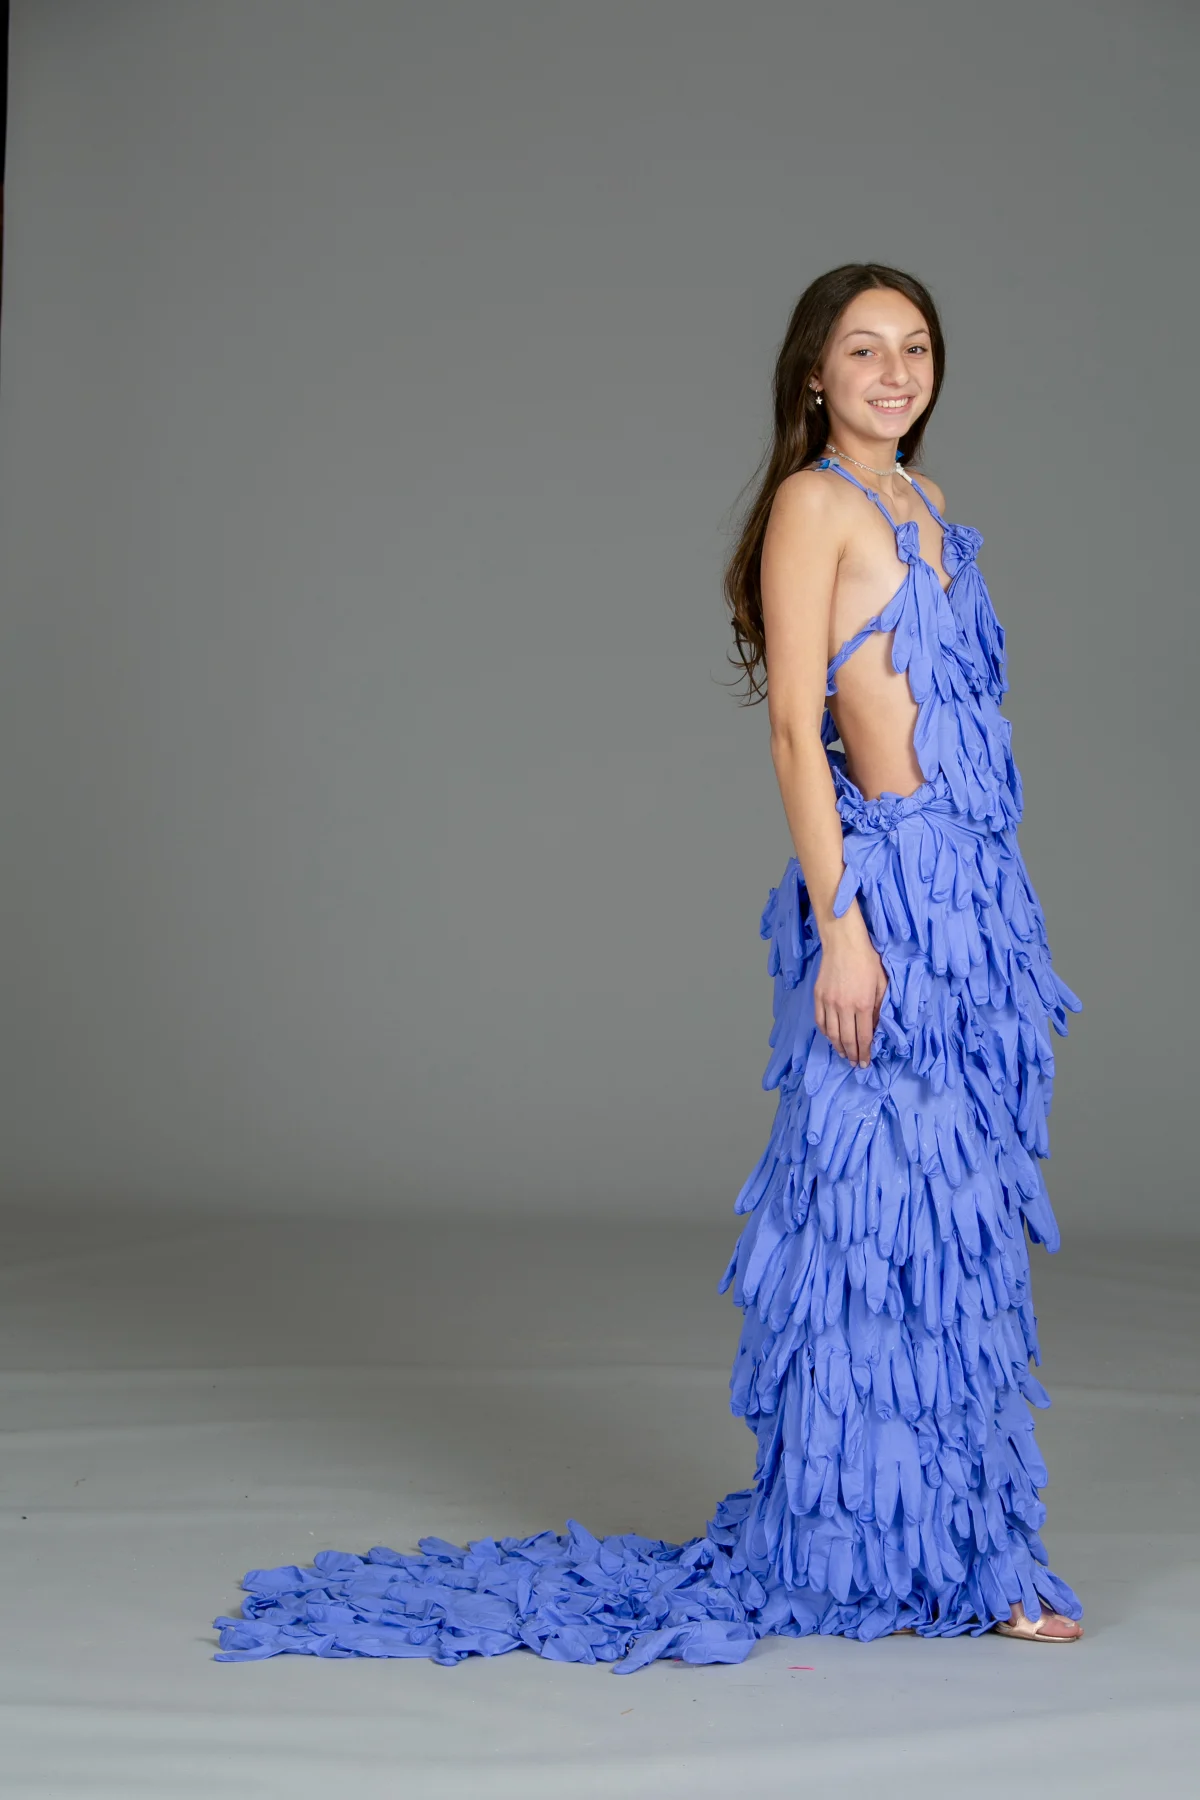 Innovative Haute Couture from the House of ECFS - Ethical Culture